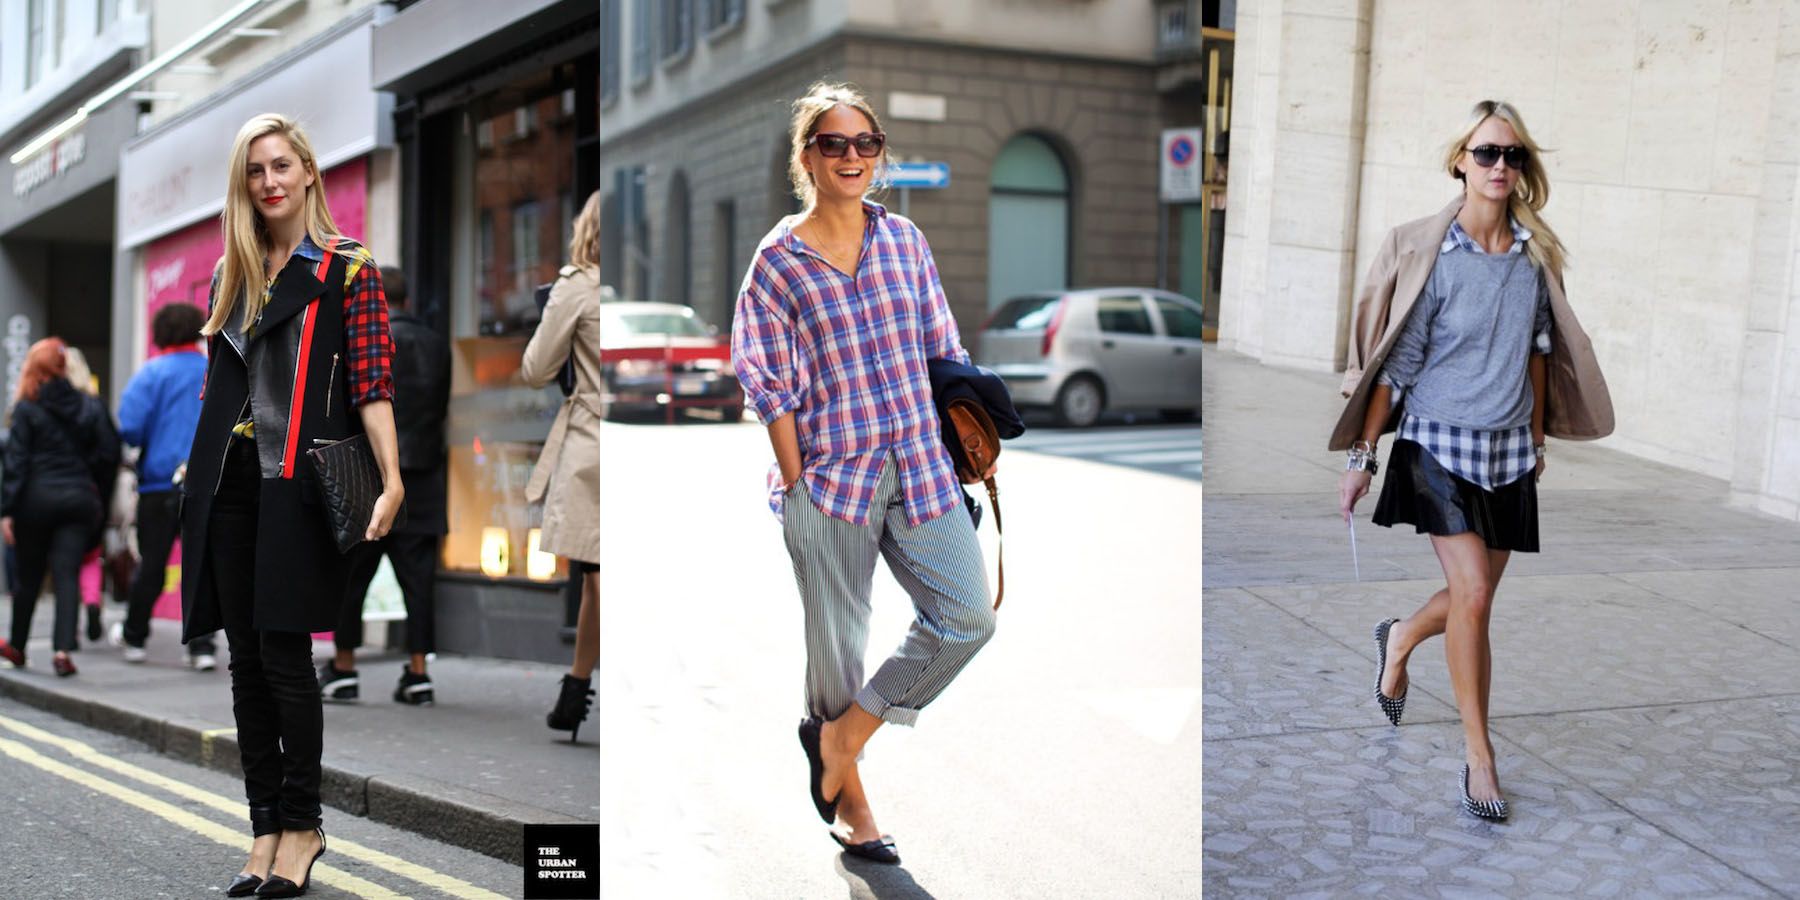 Mix N Match Plaid Skirts And Shirts That Will Make Your Style Outstanding!